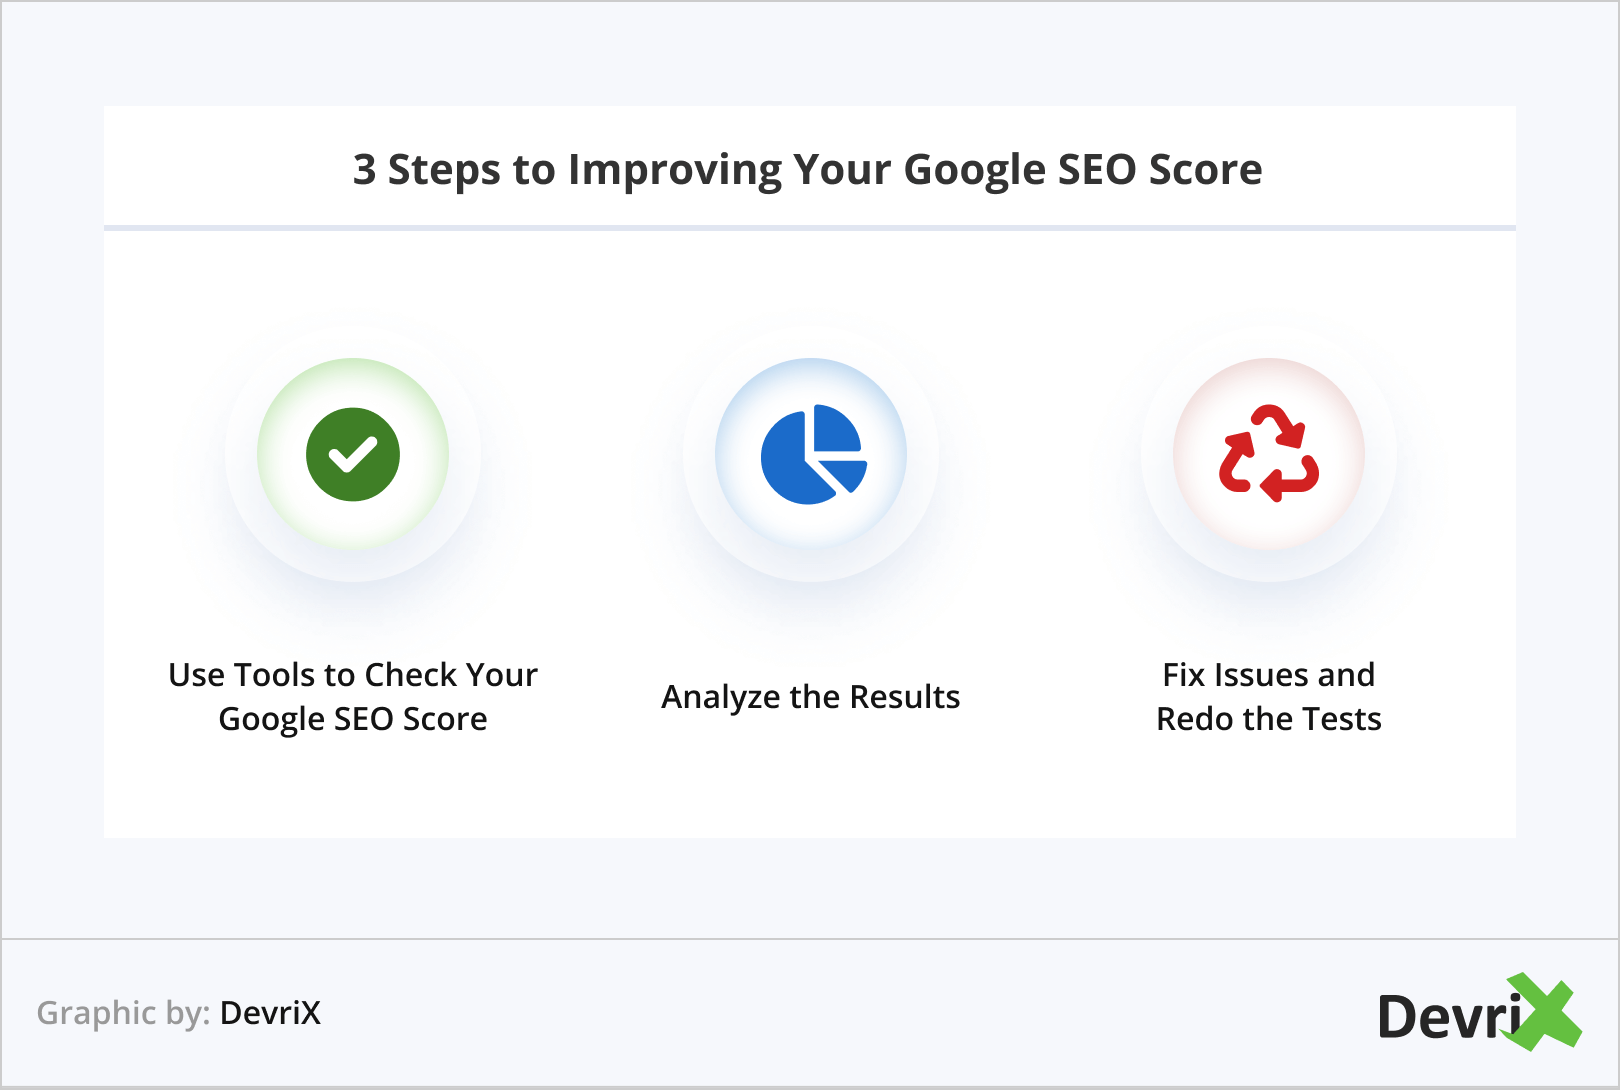 3 Steps to Improving Your Google SEO Score